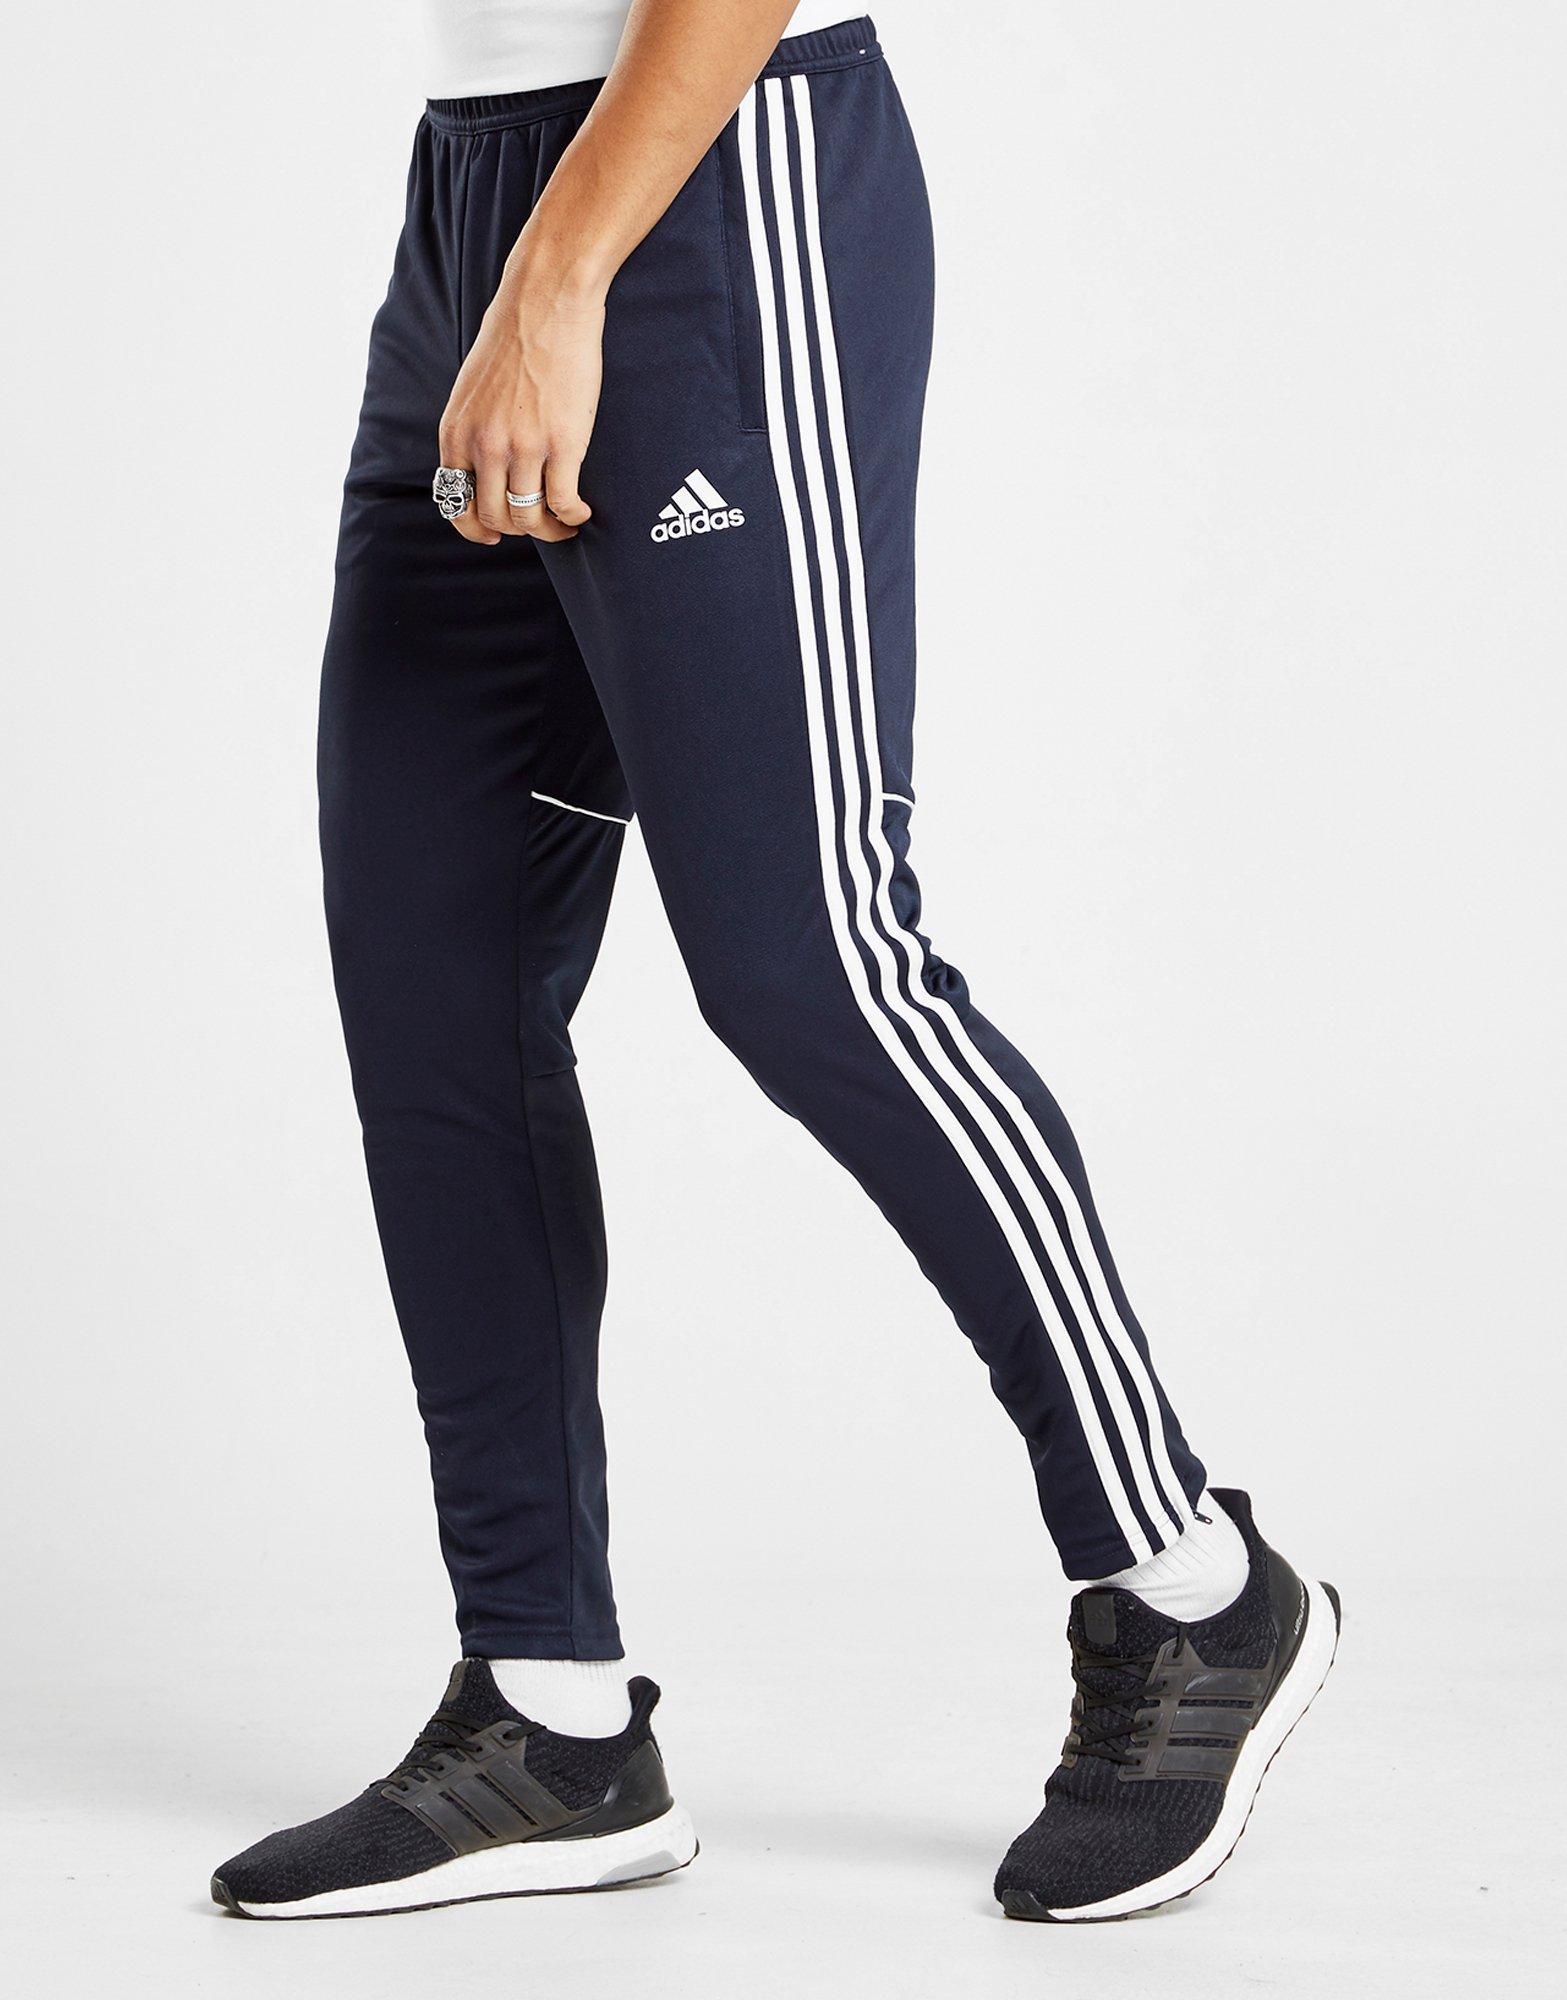 adidas Synthetic Tango Track Pants in Navy/White (Blue) for Men - Lyst